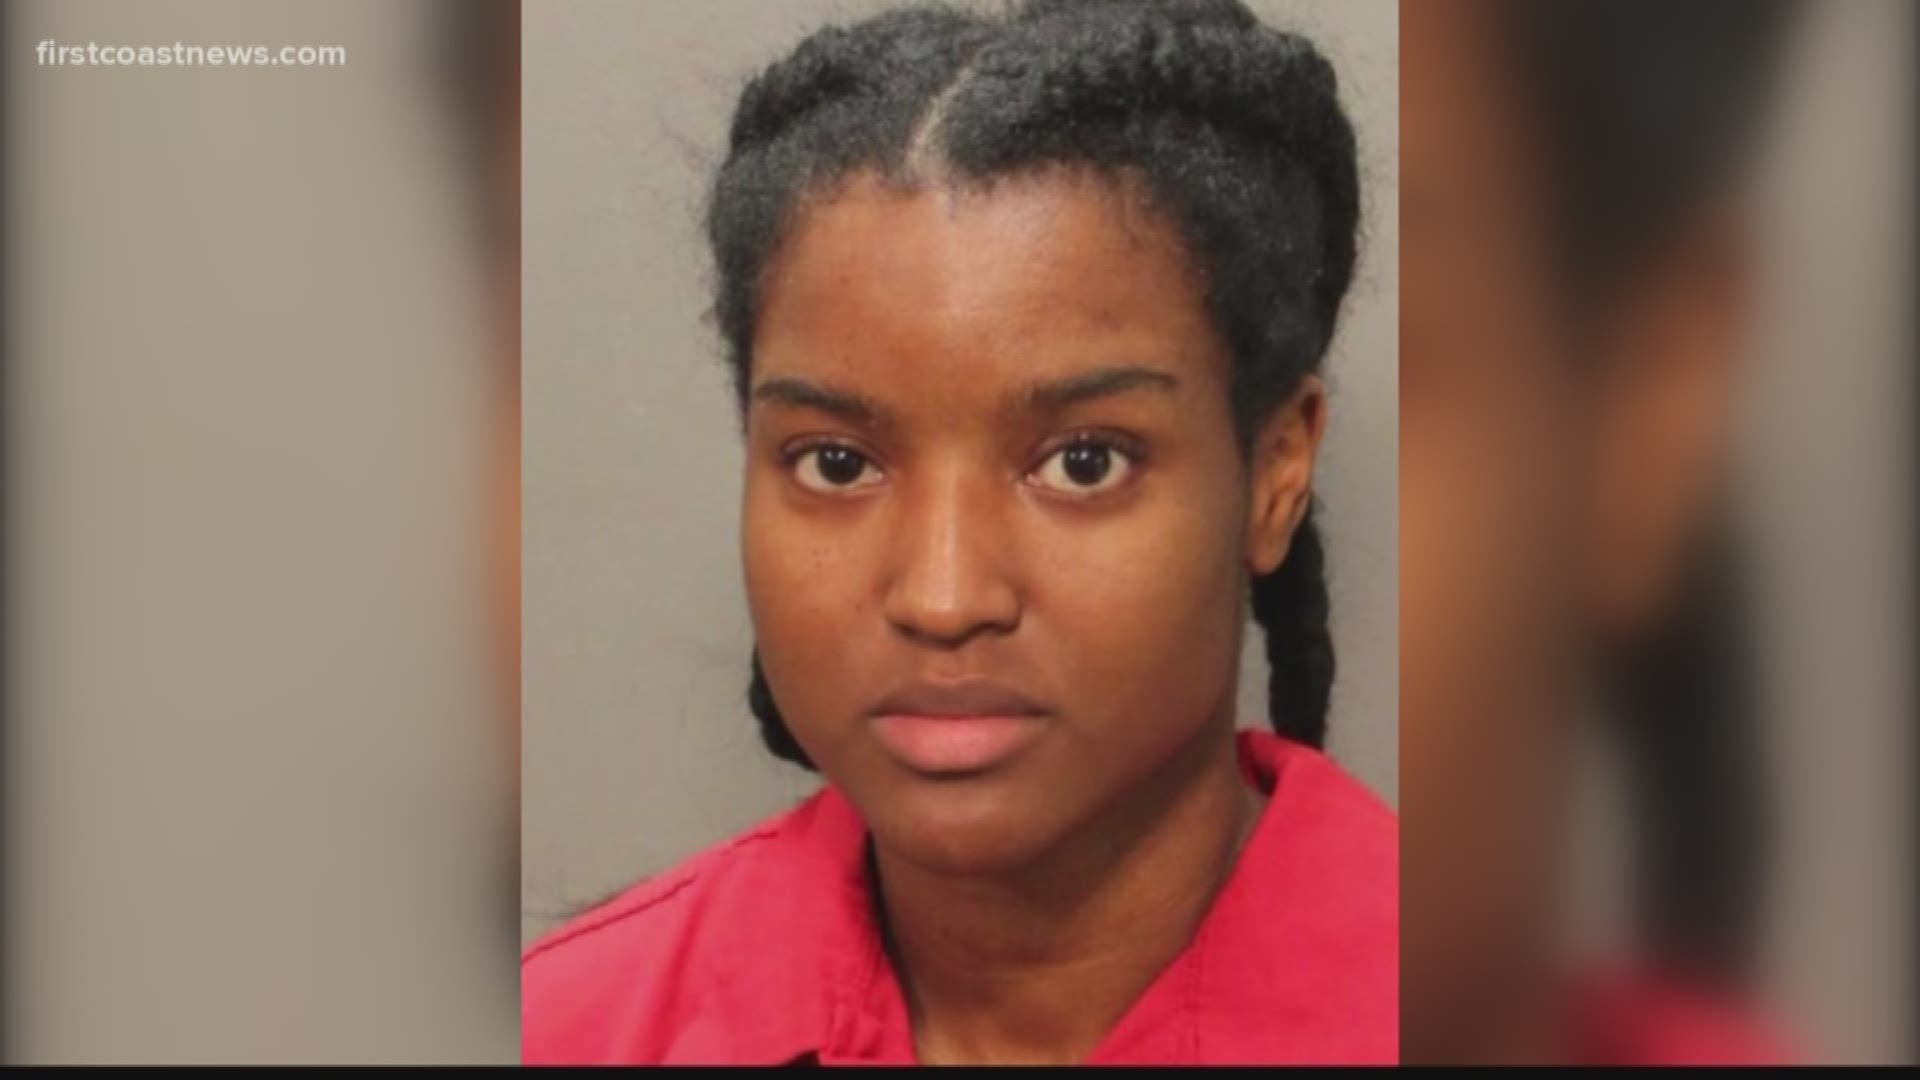 Brianna Williams, mother of missing 5-year-old Taylor Williams was moved from the hospital to the Duval County Jail a week after attempting suicide.